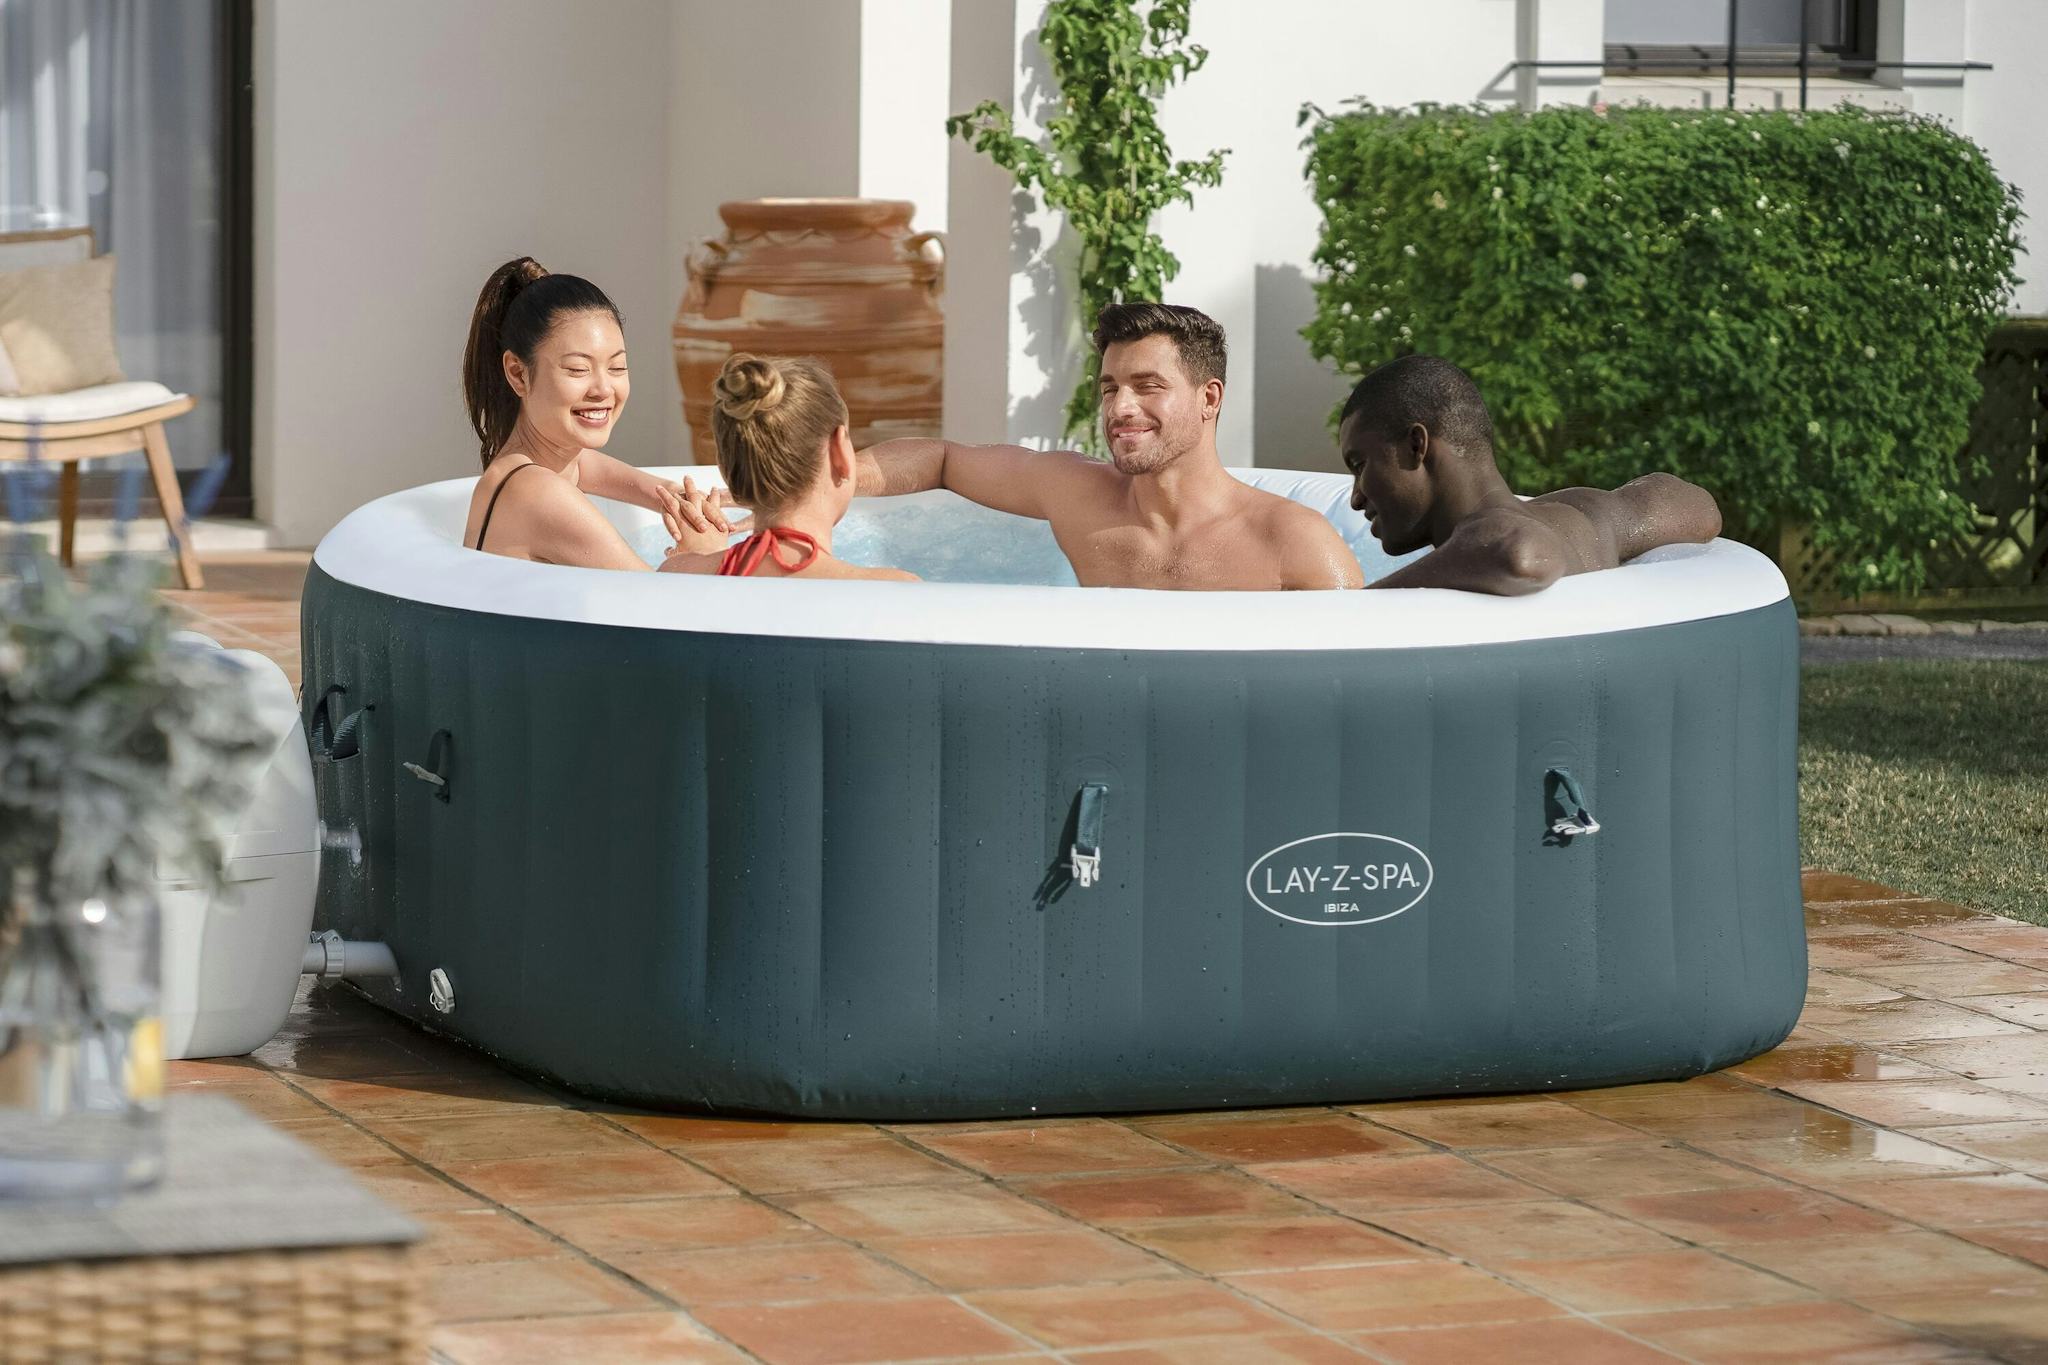 Spas Gonflables Spa gonflable carré Lay-Z-Spa Ibiza Airjet™ 4 - 6 personnes Bestway 3